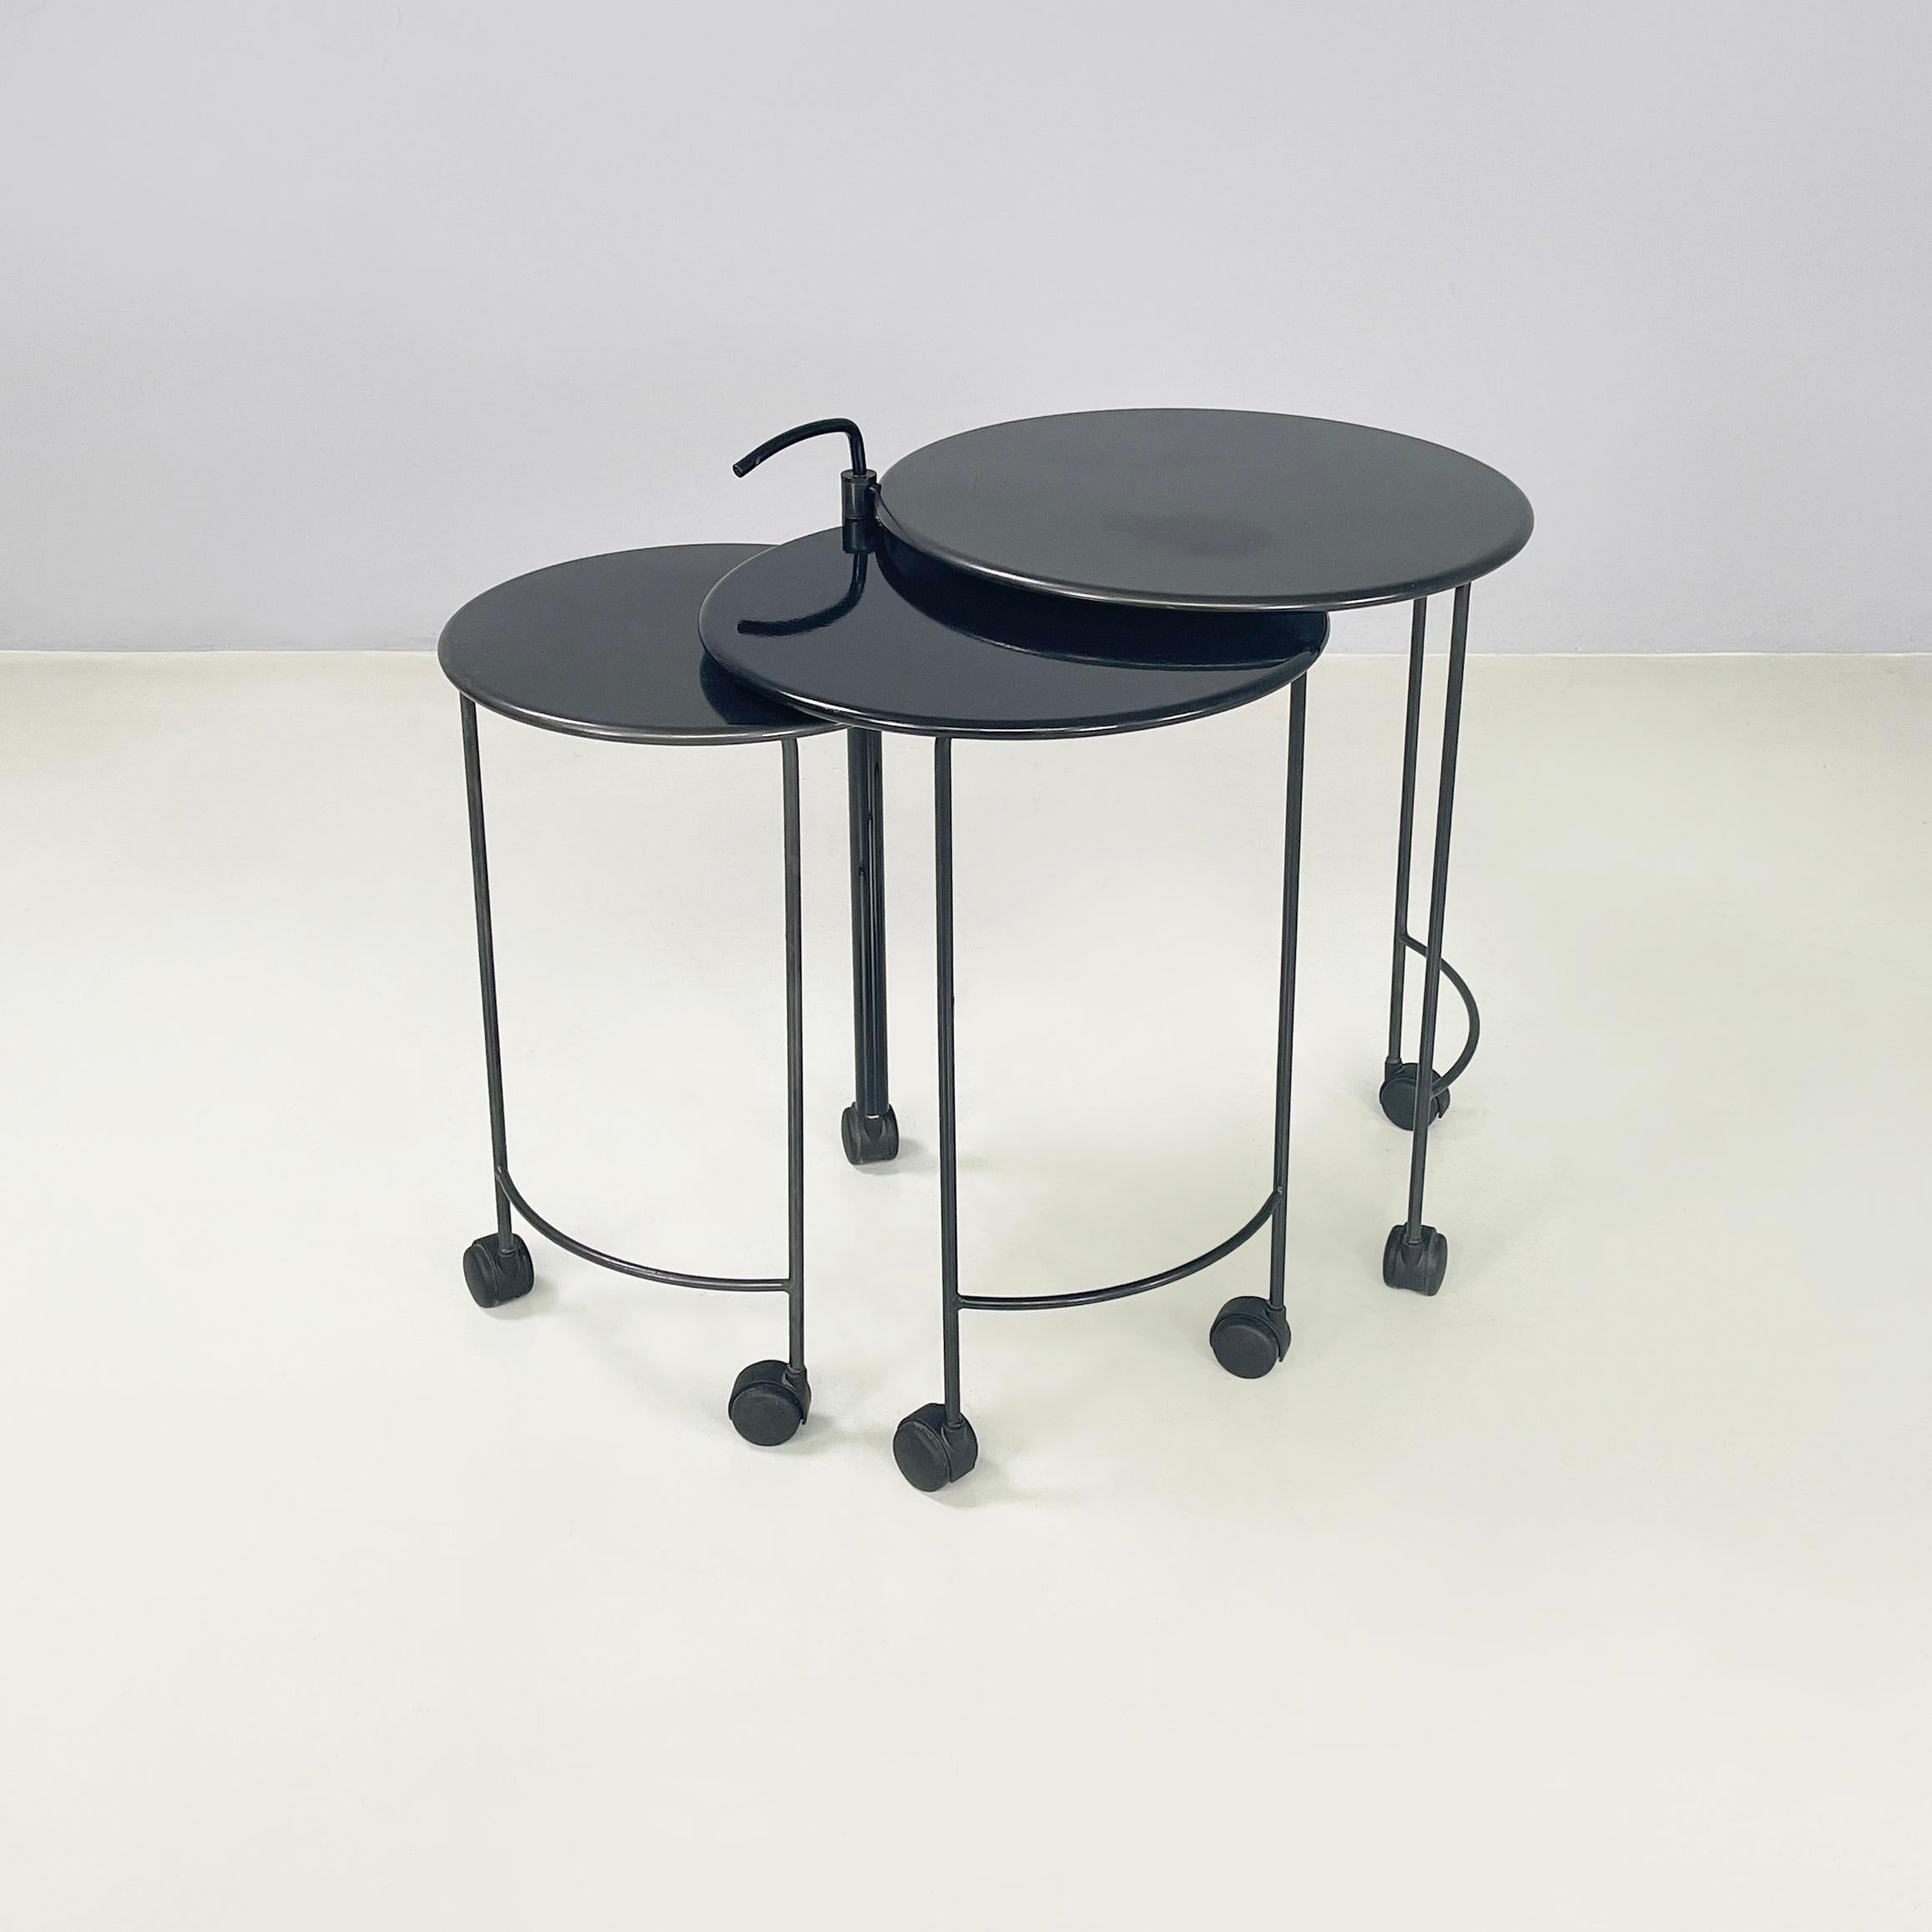 Italian modern Cart with 3 round tops in black metal, 1980s
Cart with 3 round shelves at different heights, entirely in black painted metal. The 3 tops can rotate around a central leg, in fact these can be arranged next to each other or aligned one